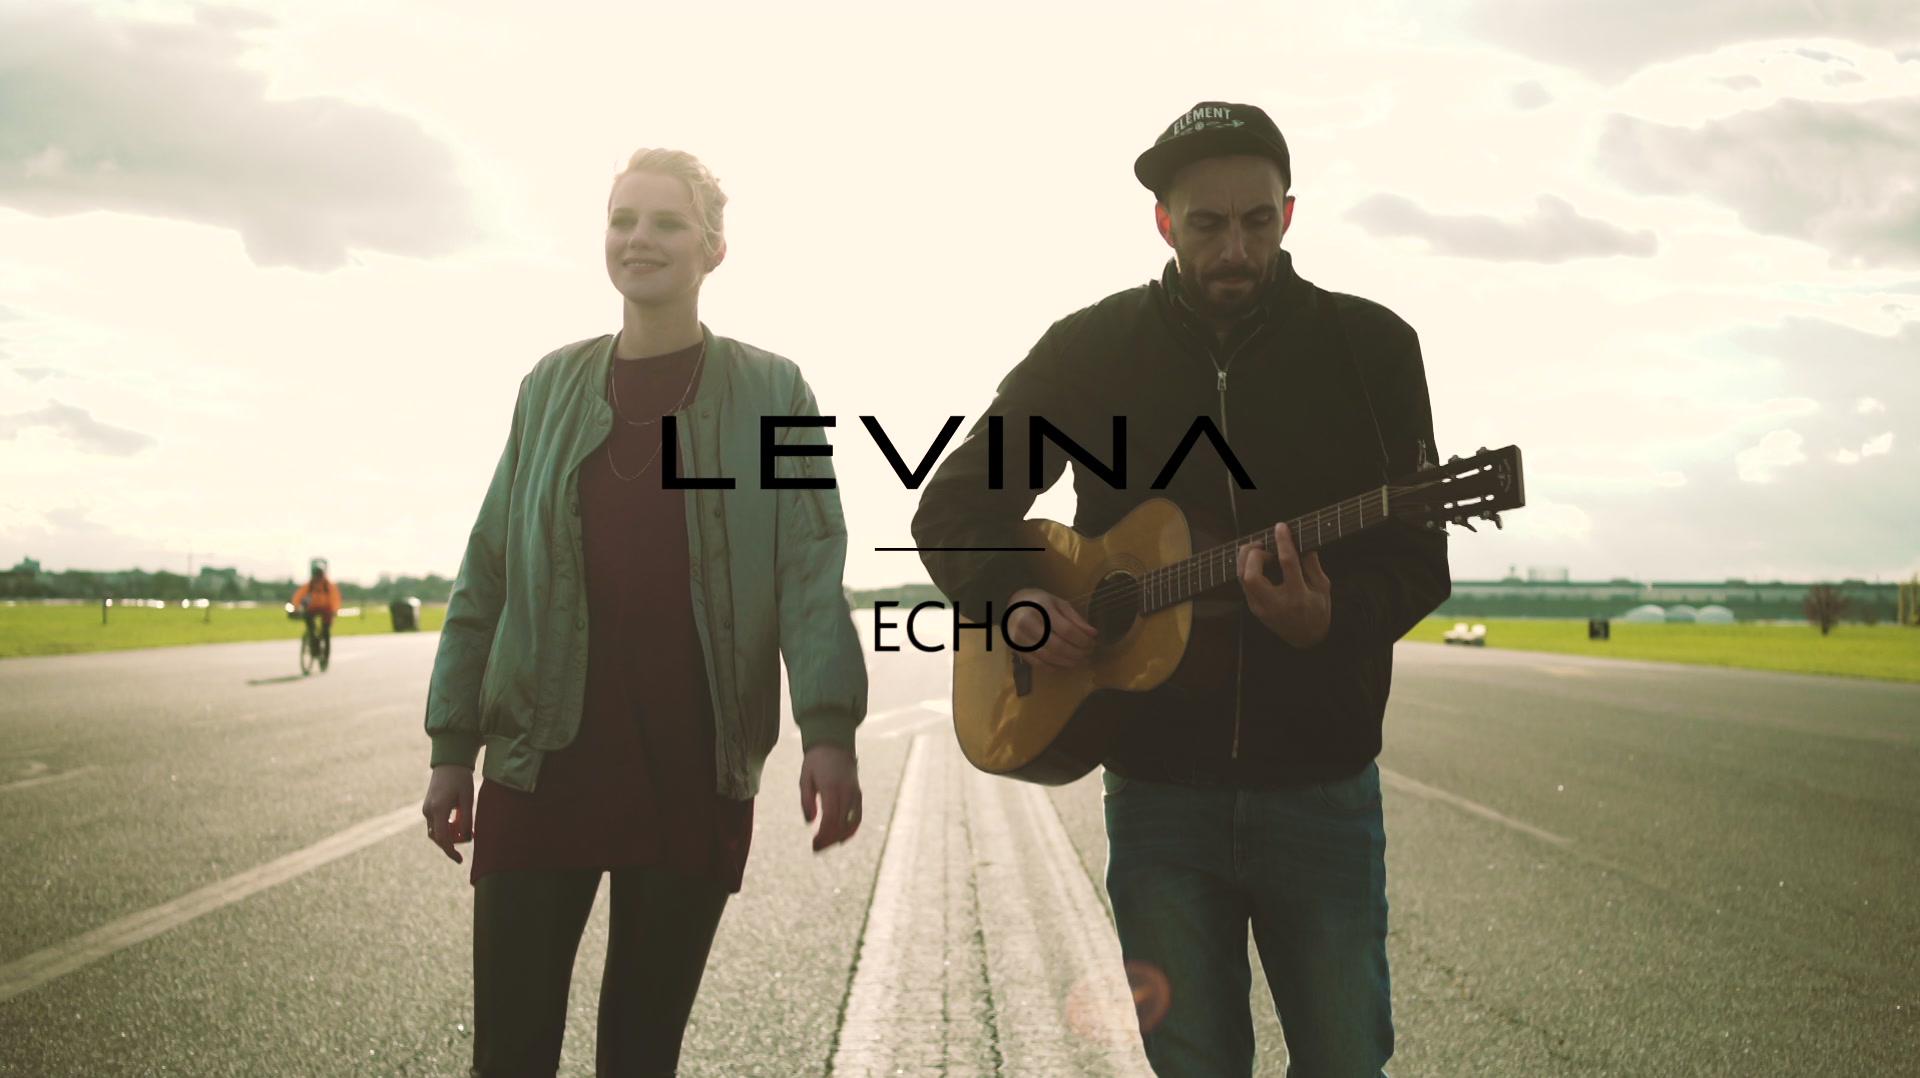 Levina - Echo (Live & Acoustic) (Official Music Video)